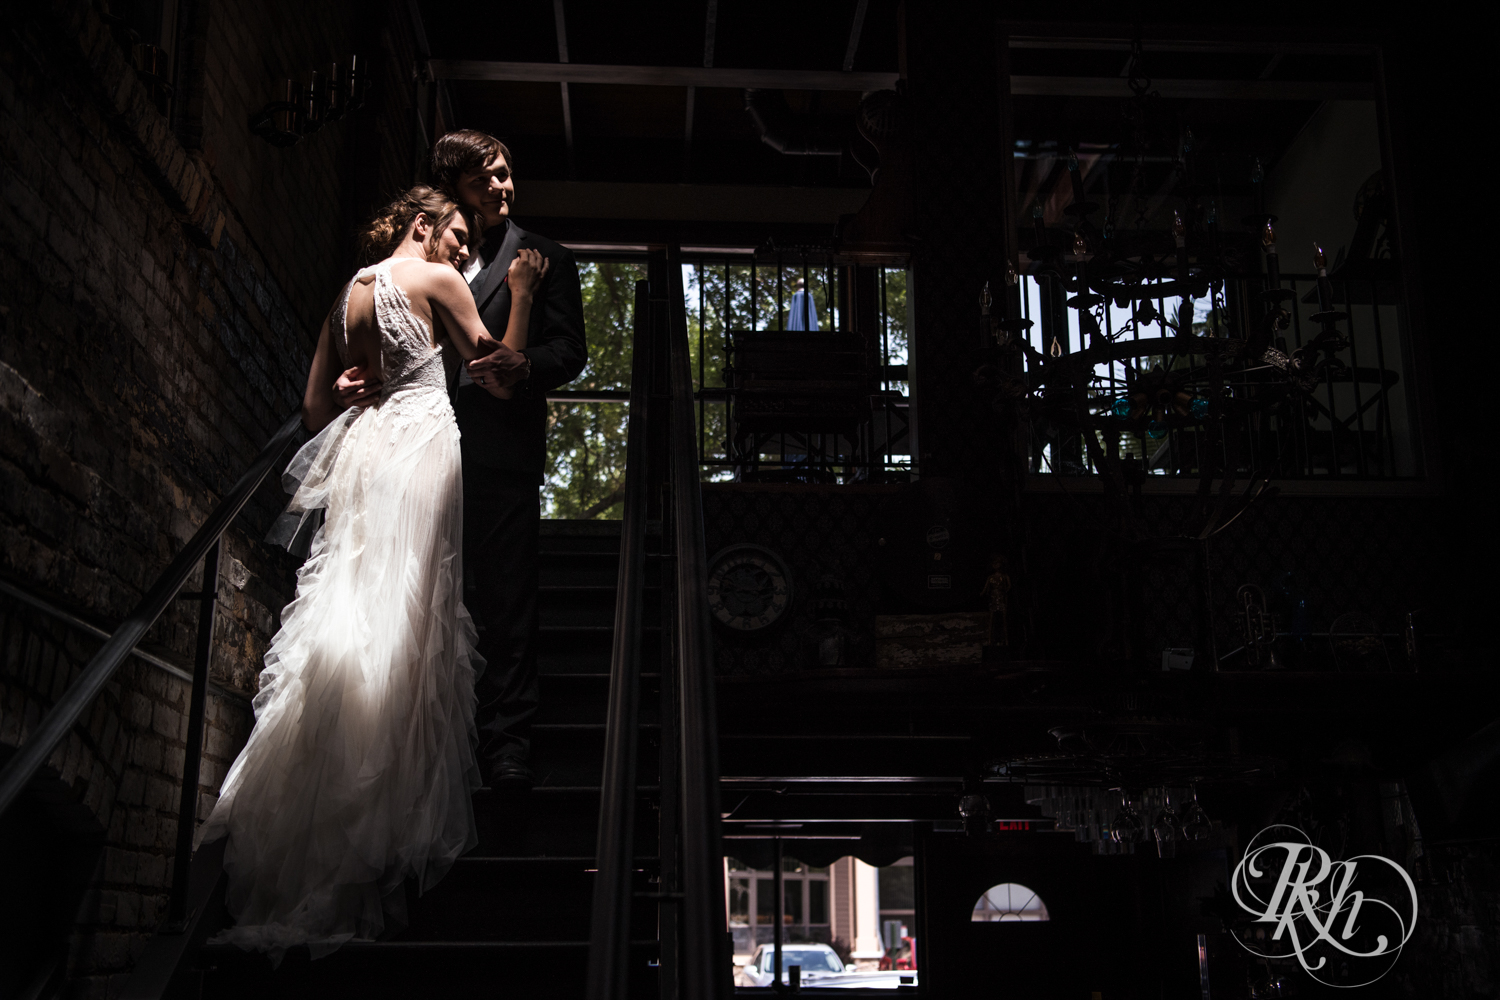 Bride and groom smile on stairs at Kellerman's Event Center in White Bear Lake, Minnesota.